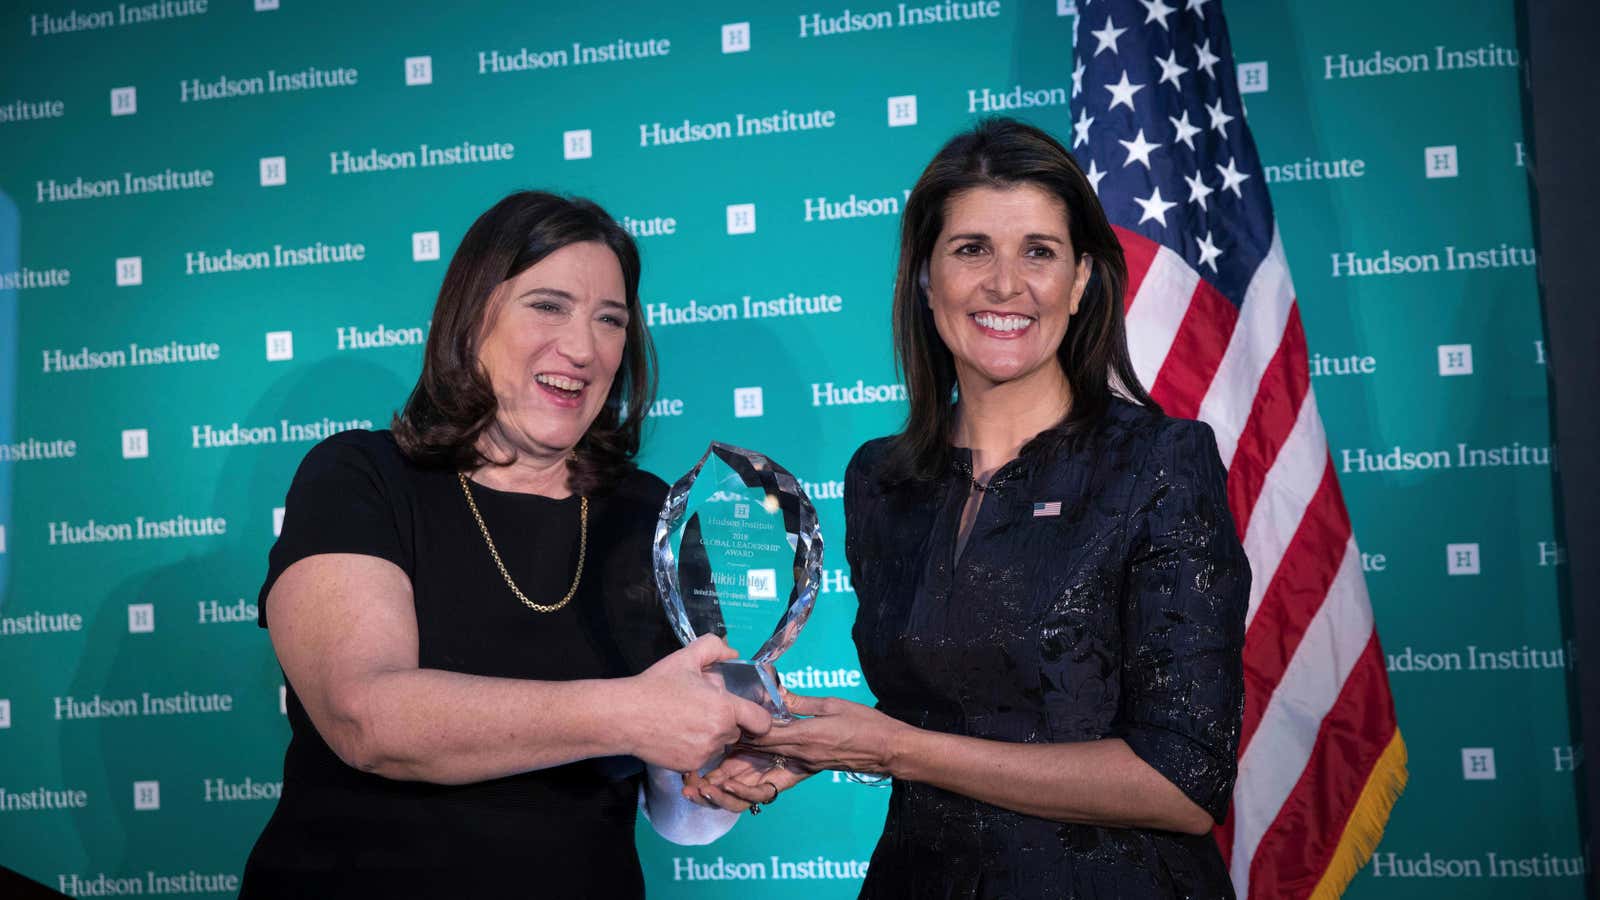 Haley blasted Russia while accepting an award at an event sponsored by an oligarch.